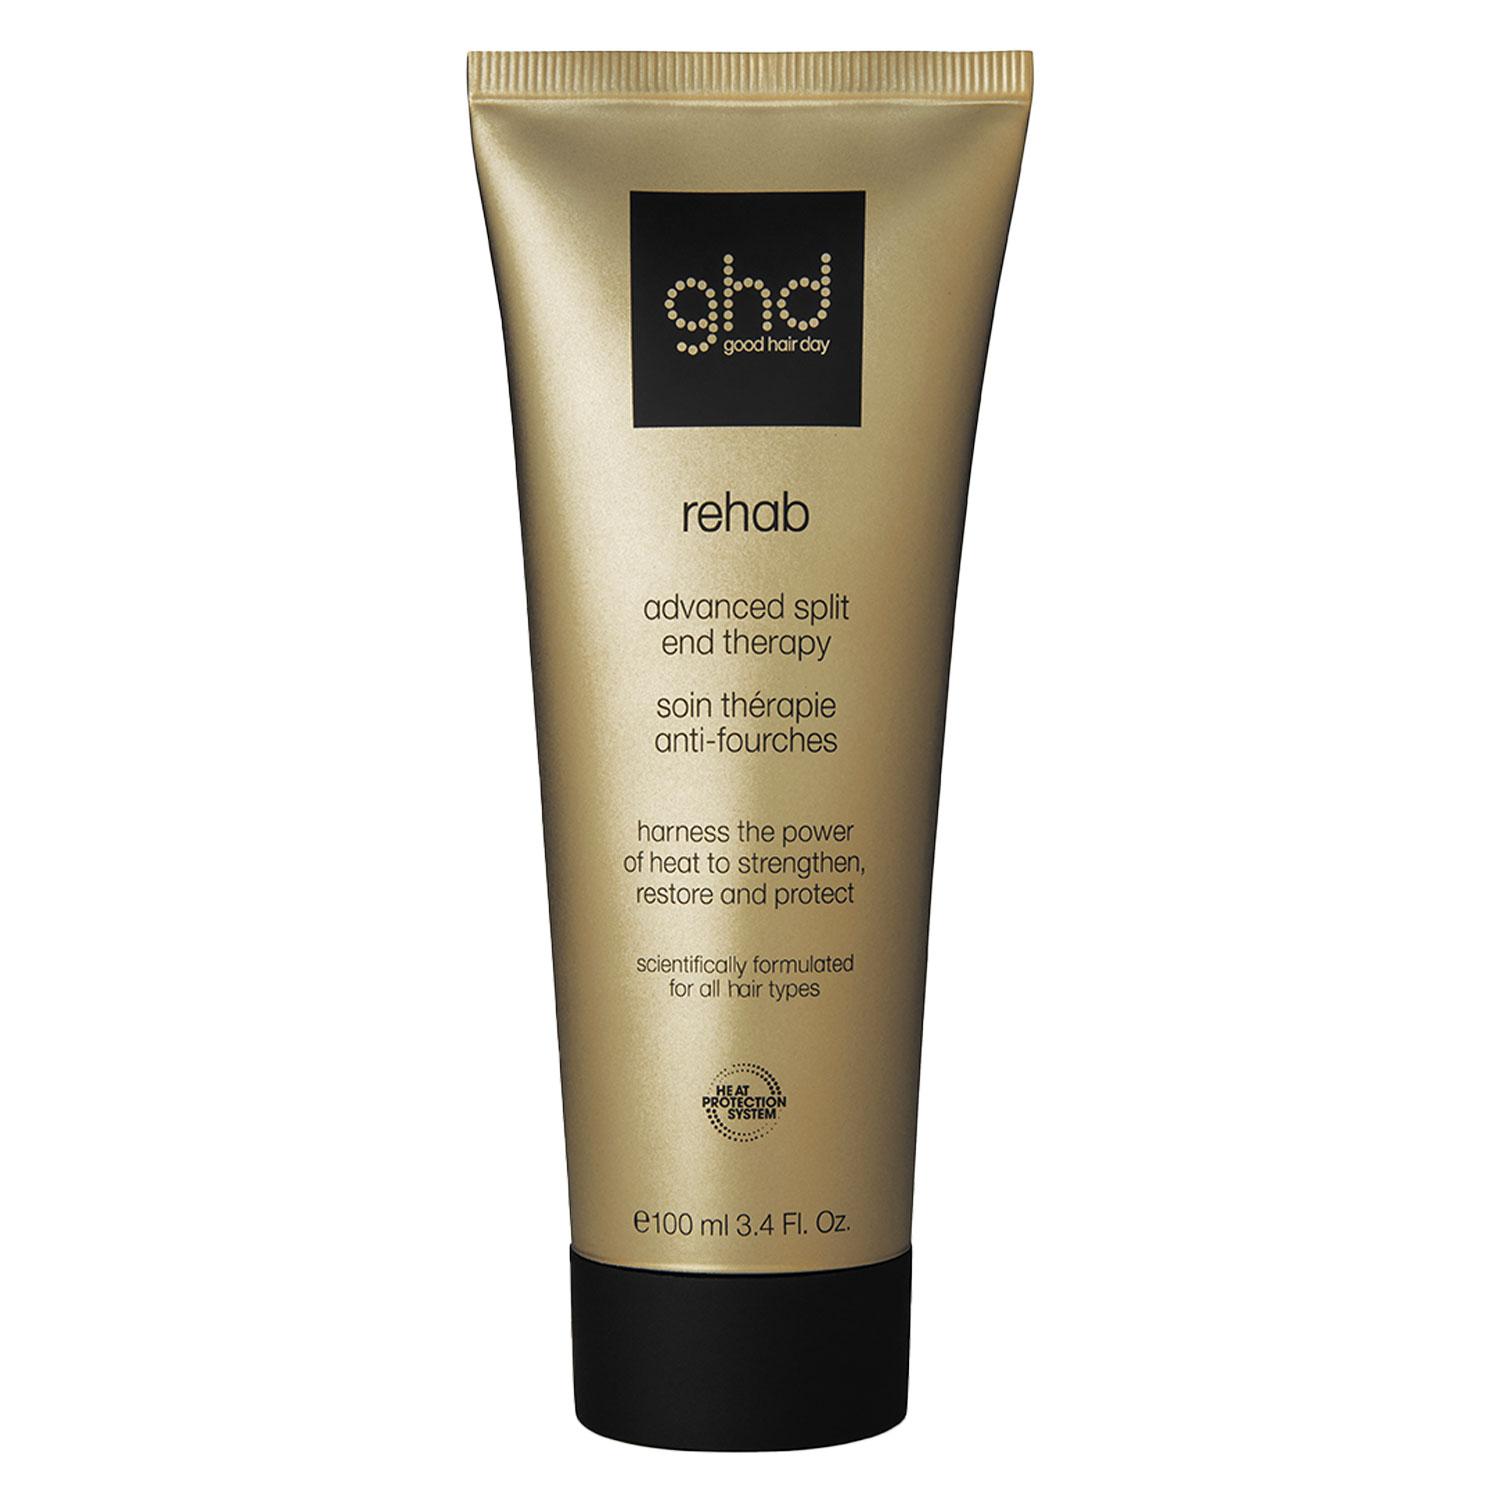 ghd Heat Protection Styling System - Rehab Advanced Split End Therapy